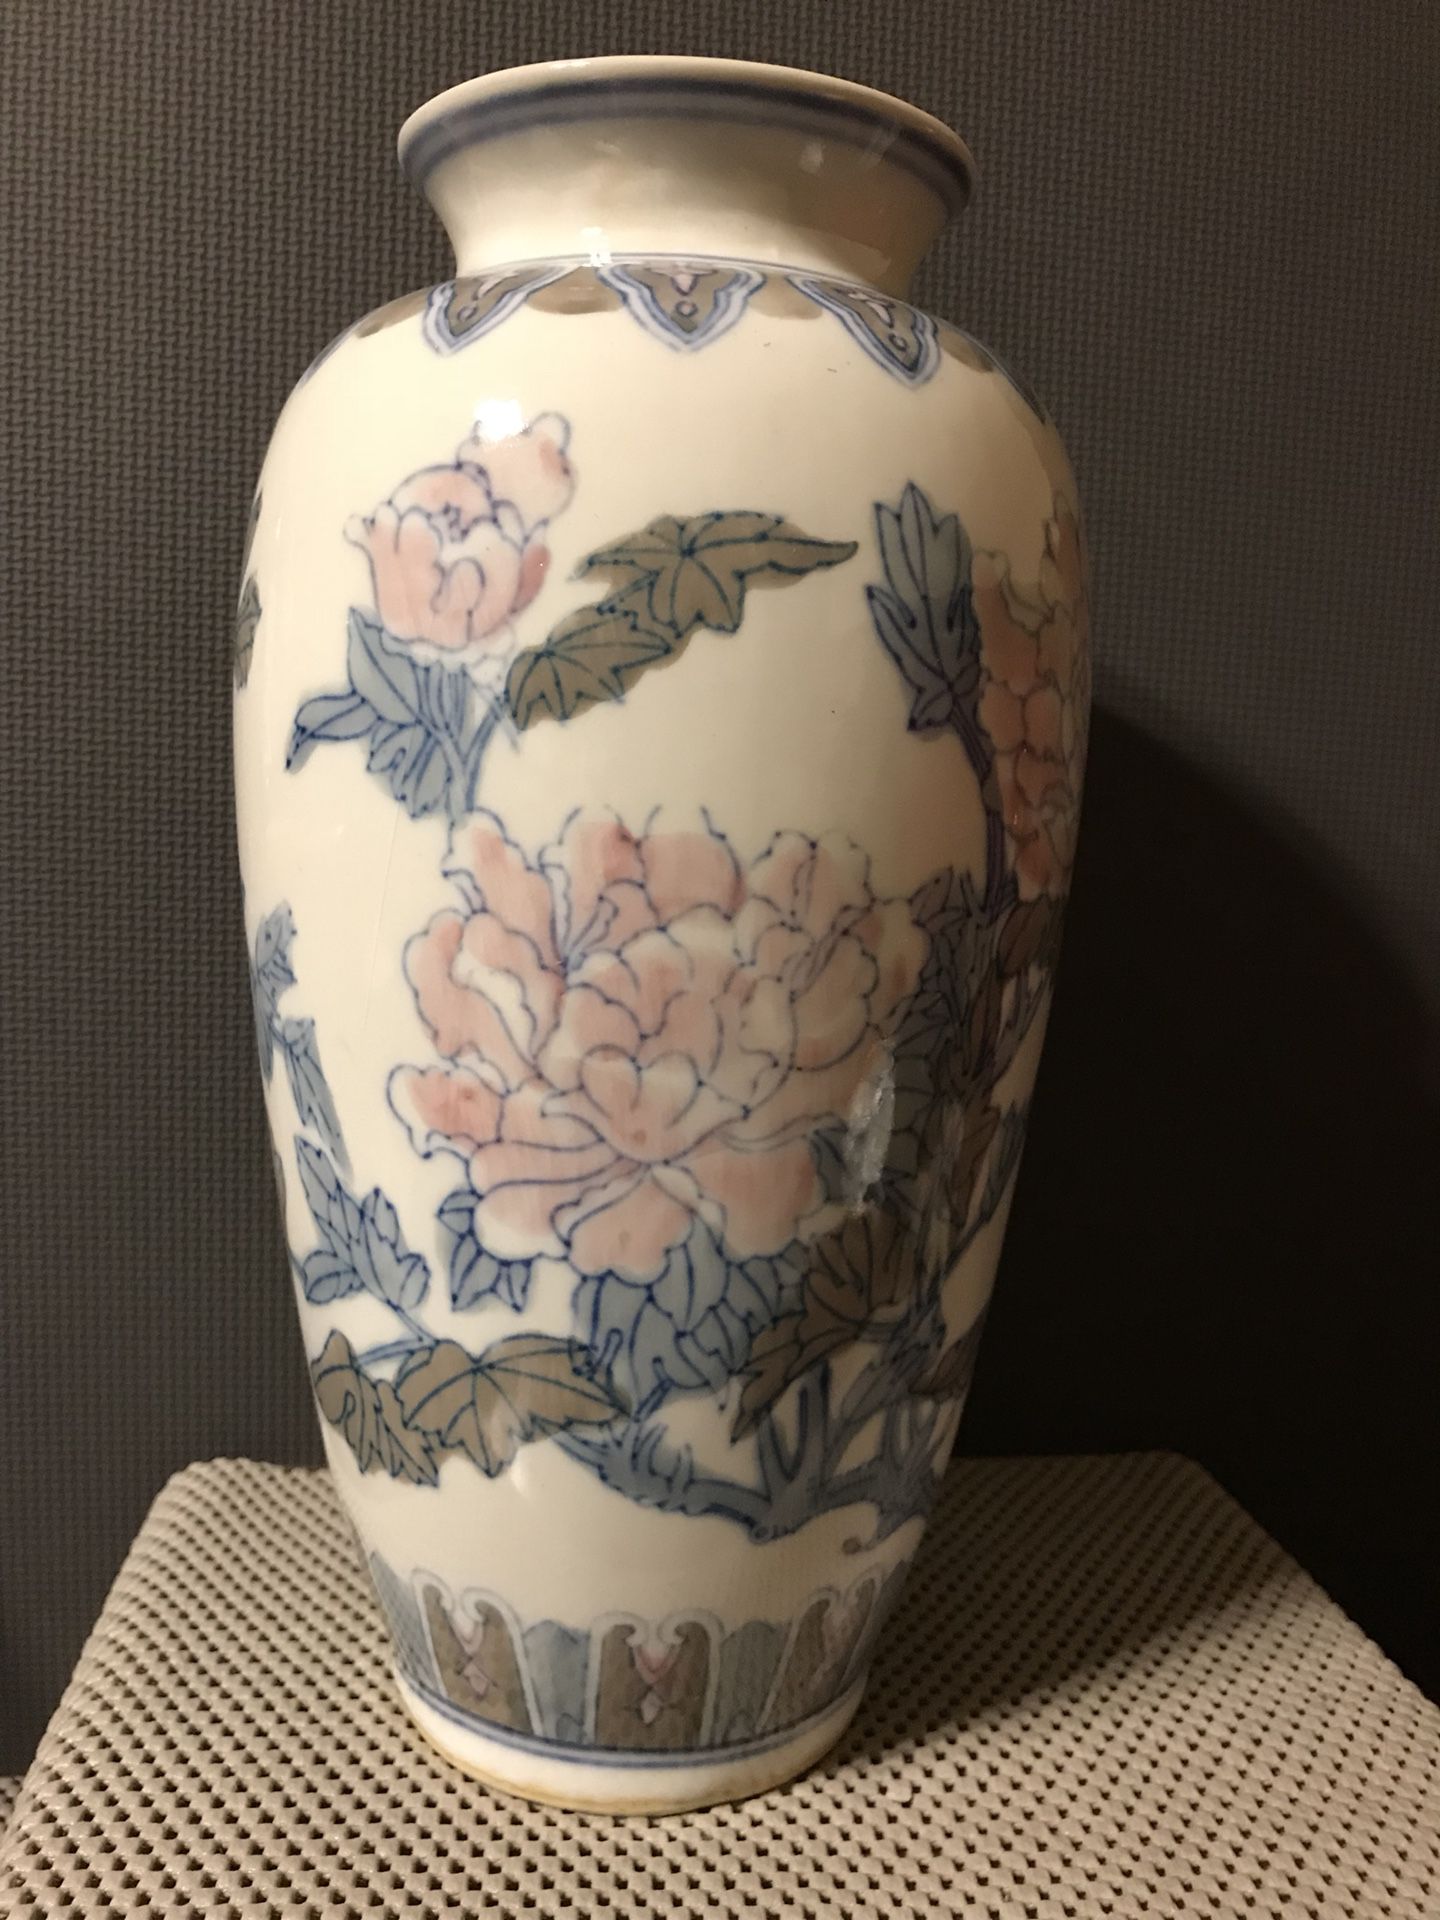 Antique Hand Painted Chinese Porcelain Vase